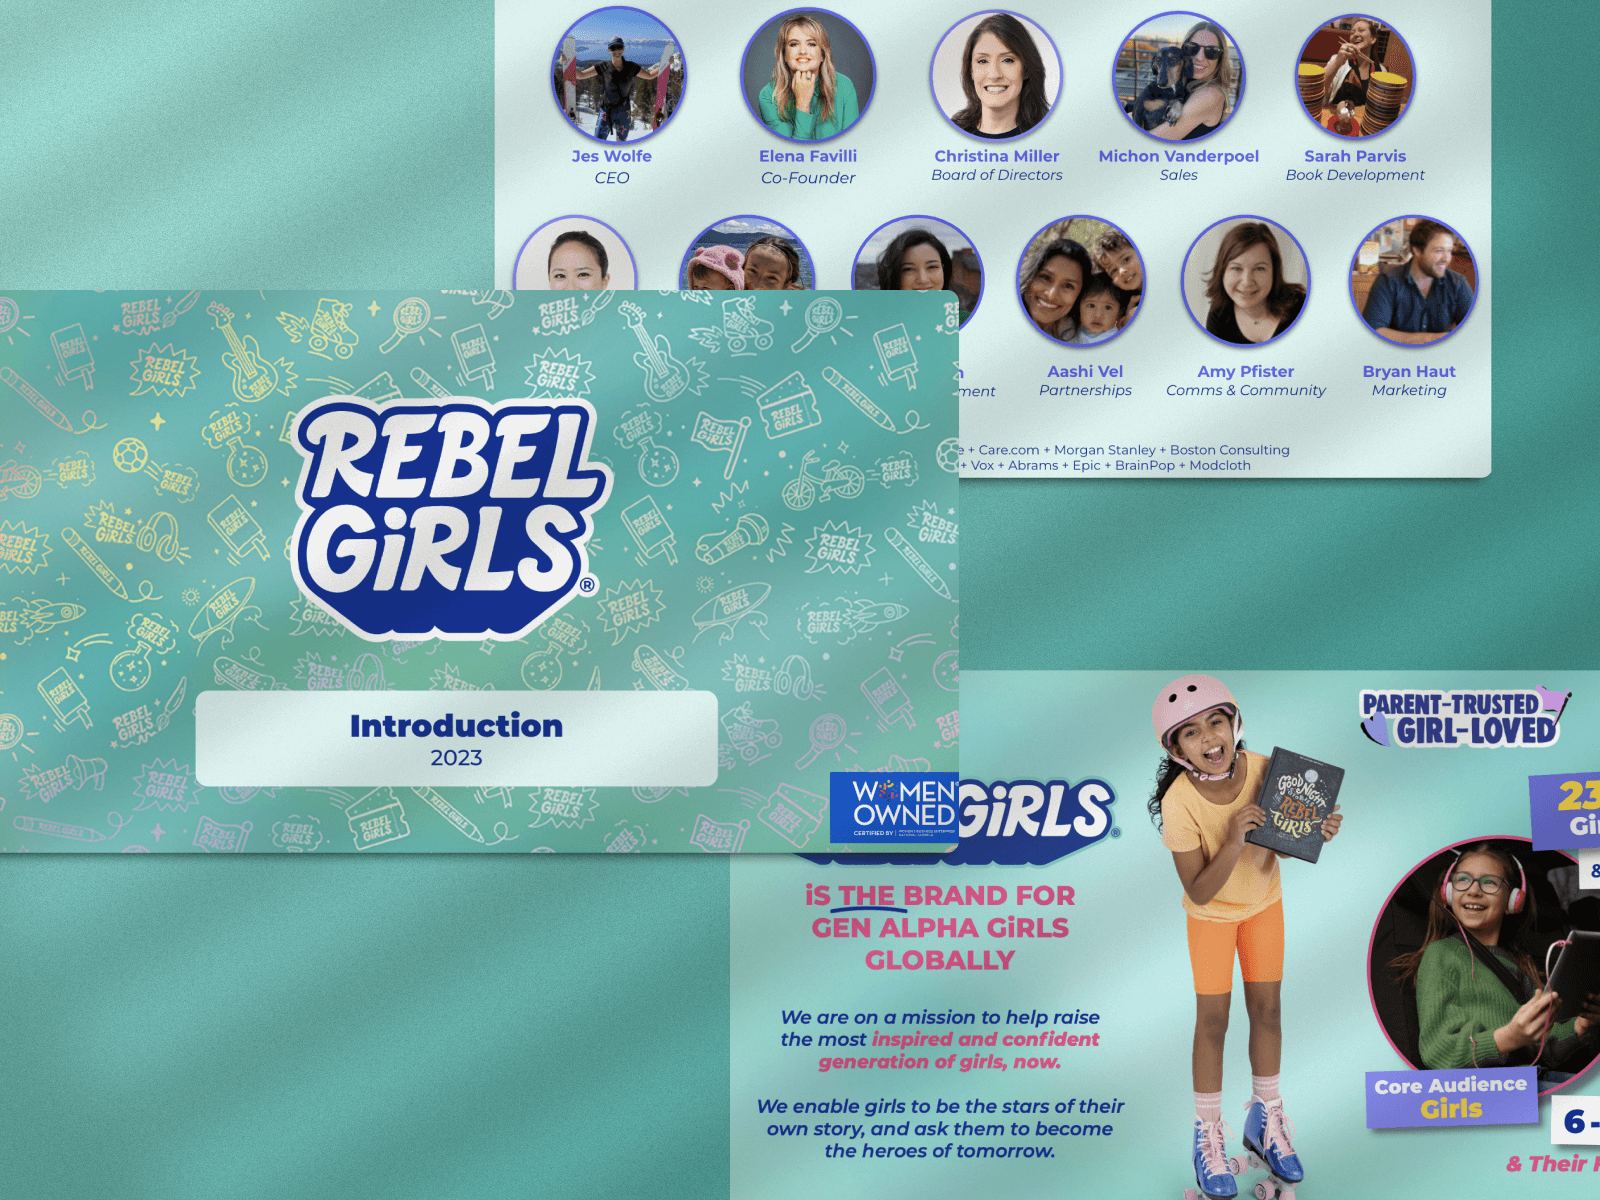 Rebel Girls pitch deck: $8M for female empowerment